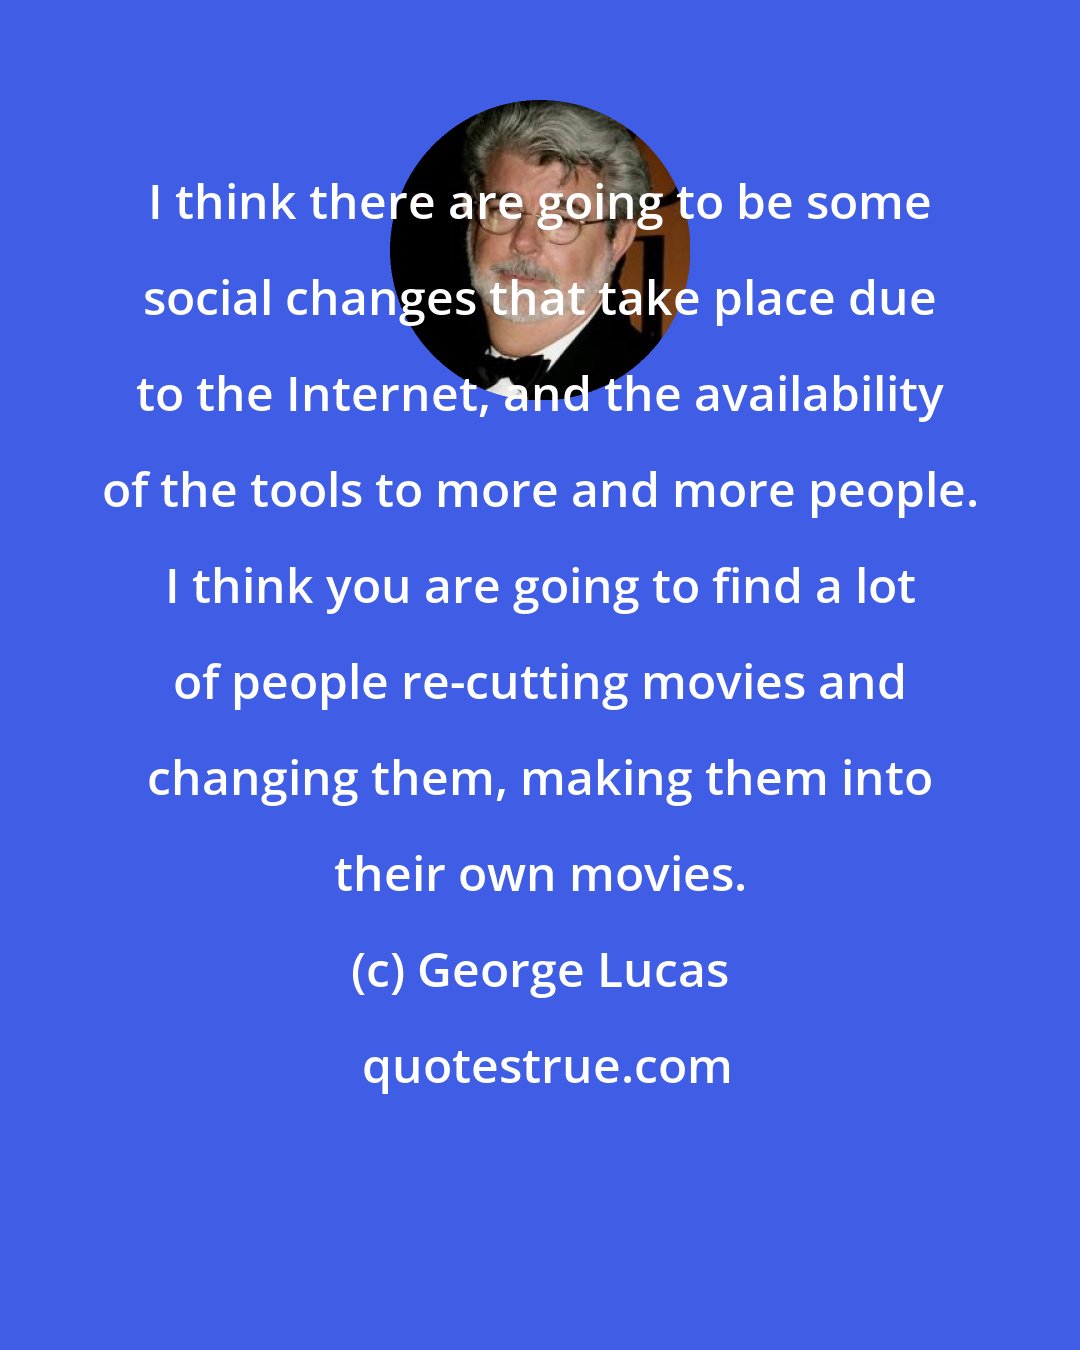 George Lucas: I think there are going to be some social changes that take place due to the Internet, and the availability of the tools to more and more people. I think you are going to find a lot of people re-cutting movies and changing them, making them into their own movies.